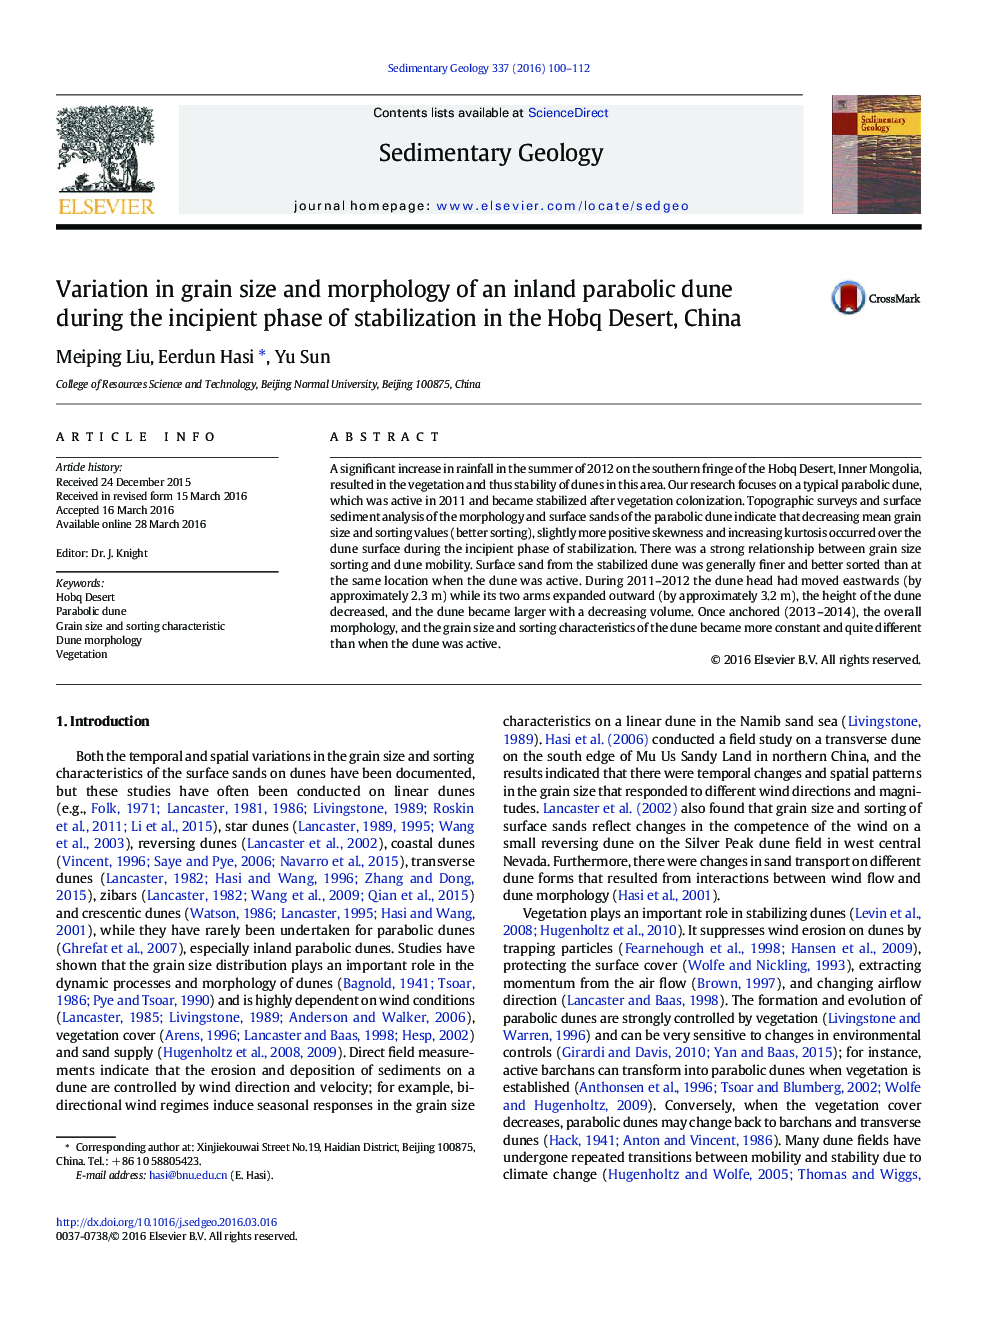 Variation in grain size and morphology of an inland parabolic dune during the incipient phase of stabilization in the Hobq Desert, China